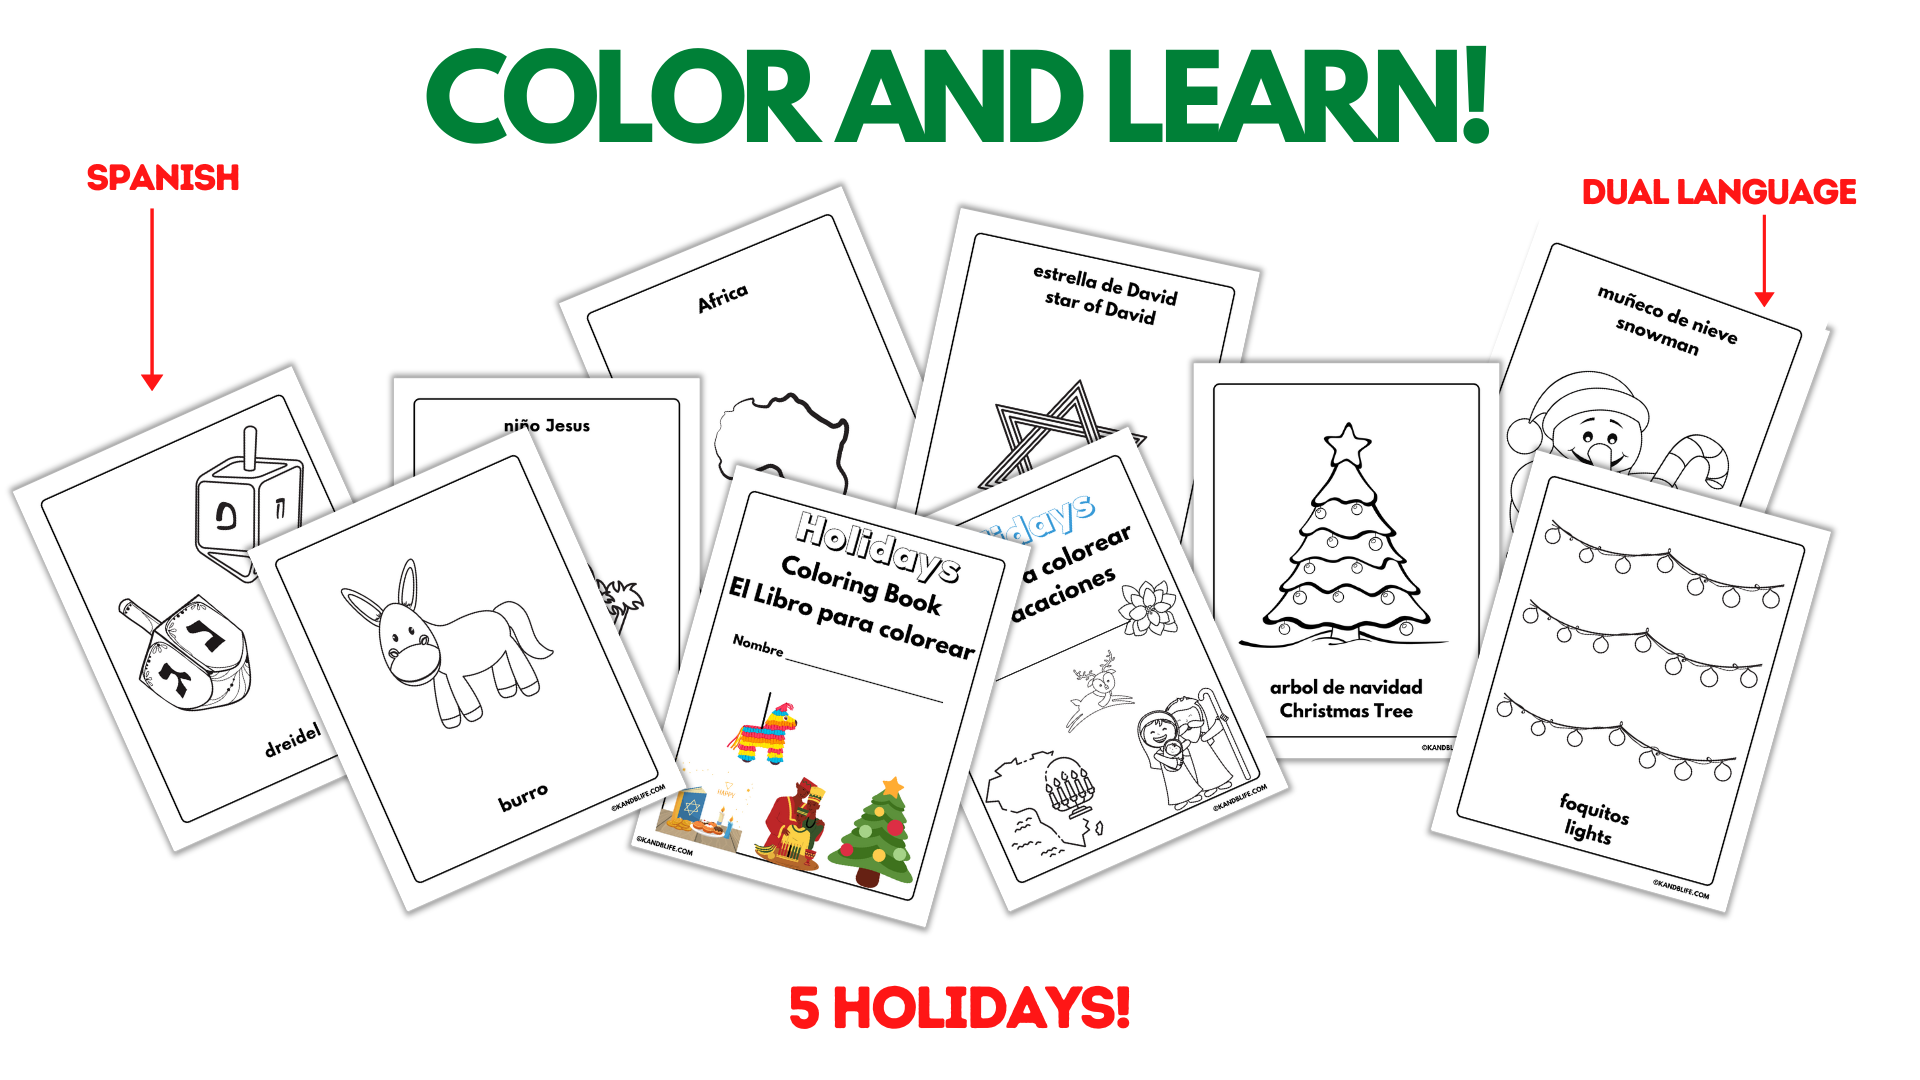 Spanish Holiday Vocabulary coloring pages.